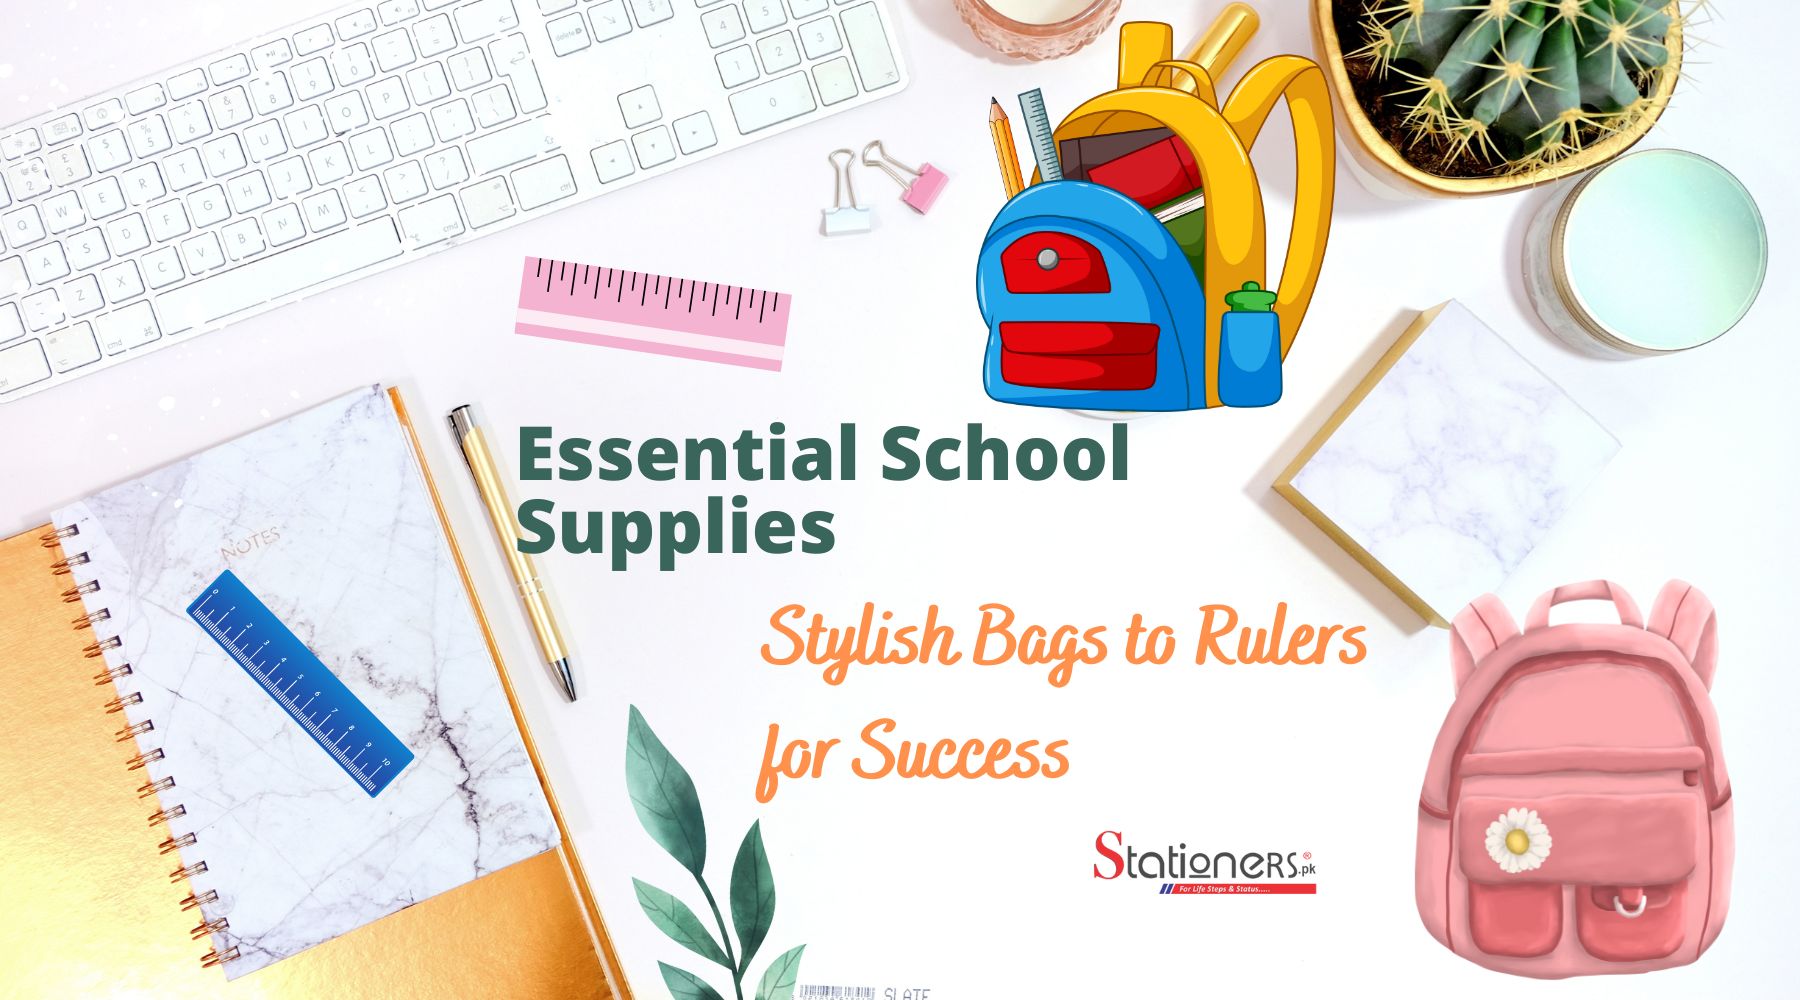 Essential School Supplies: Stylish Bags to Rulers for Success